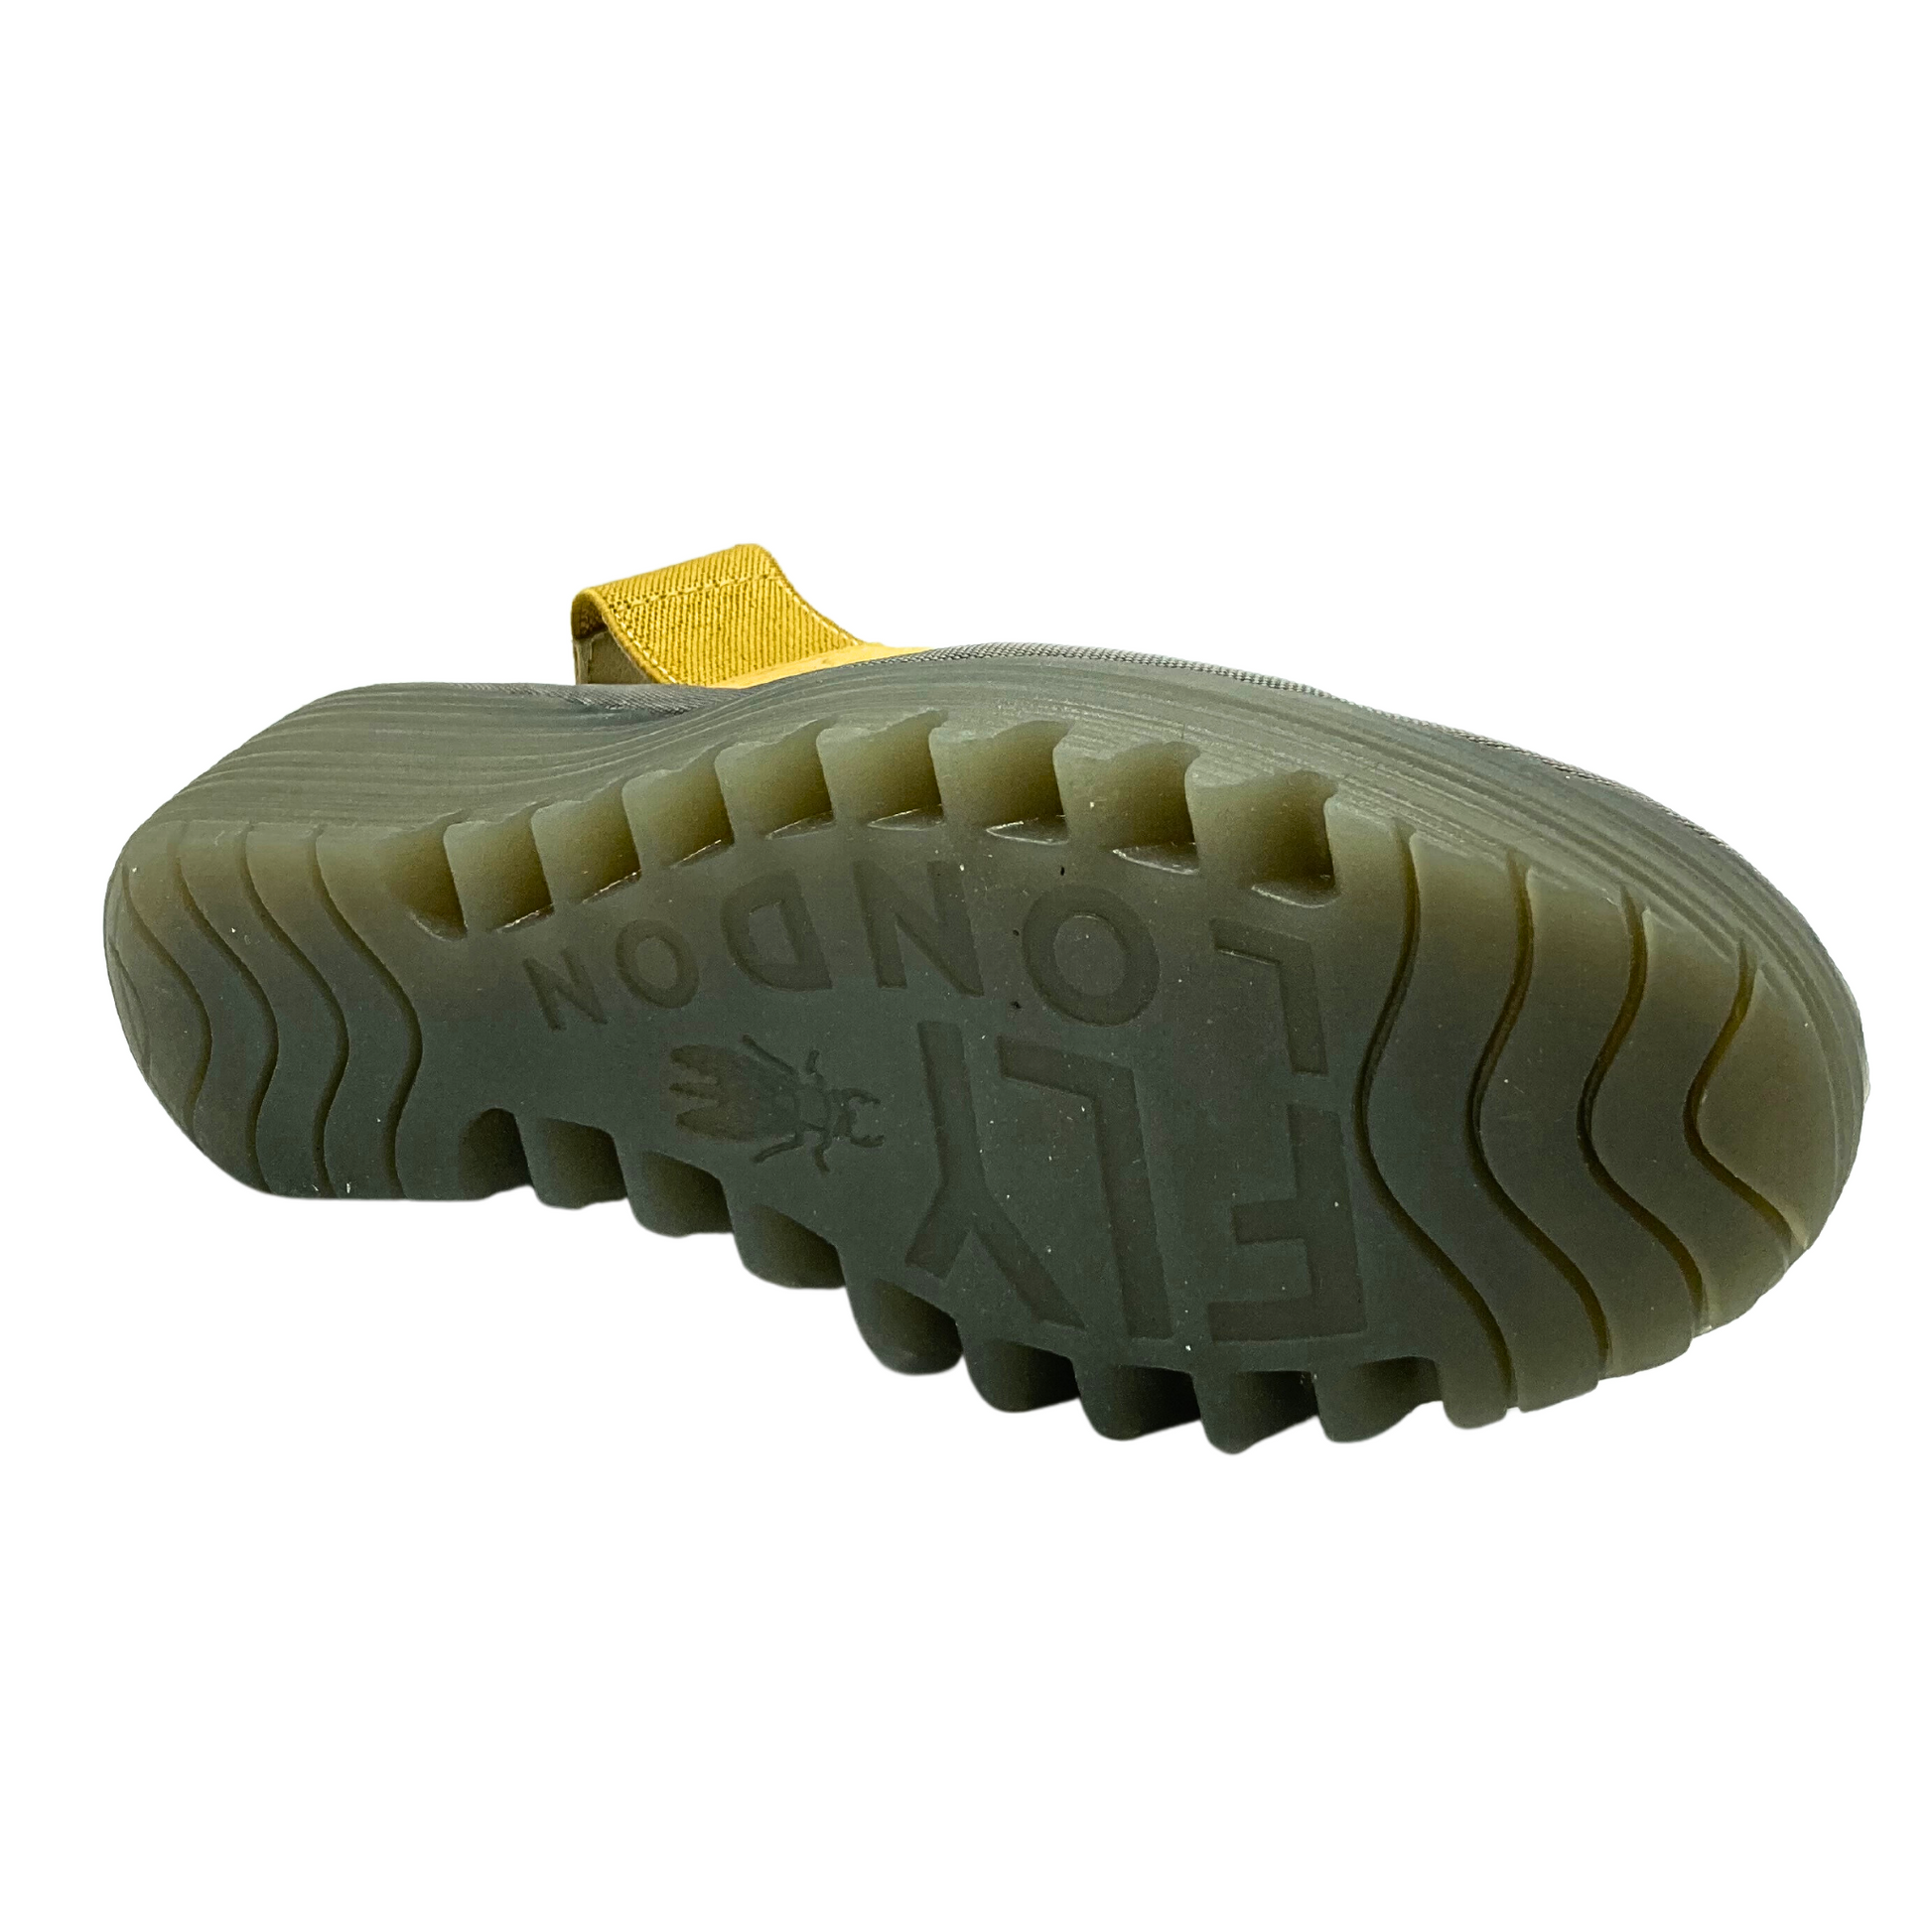 View of a rubber wedge sole